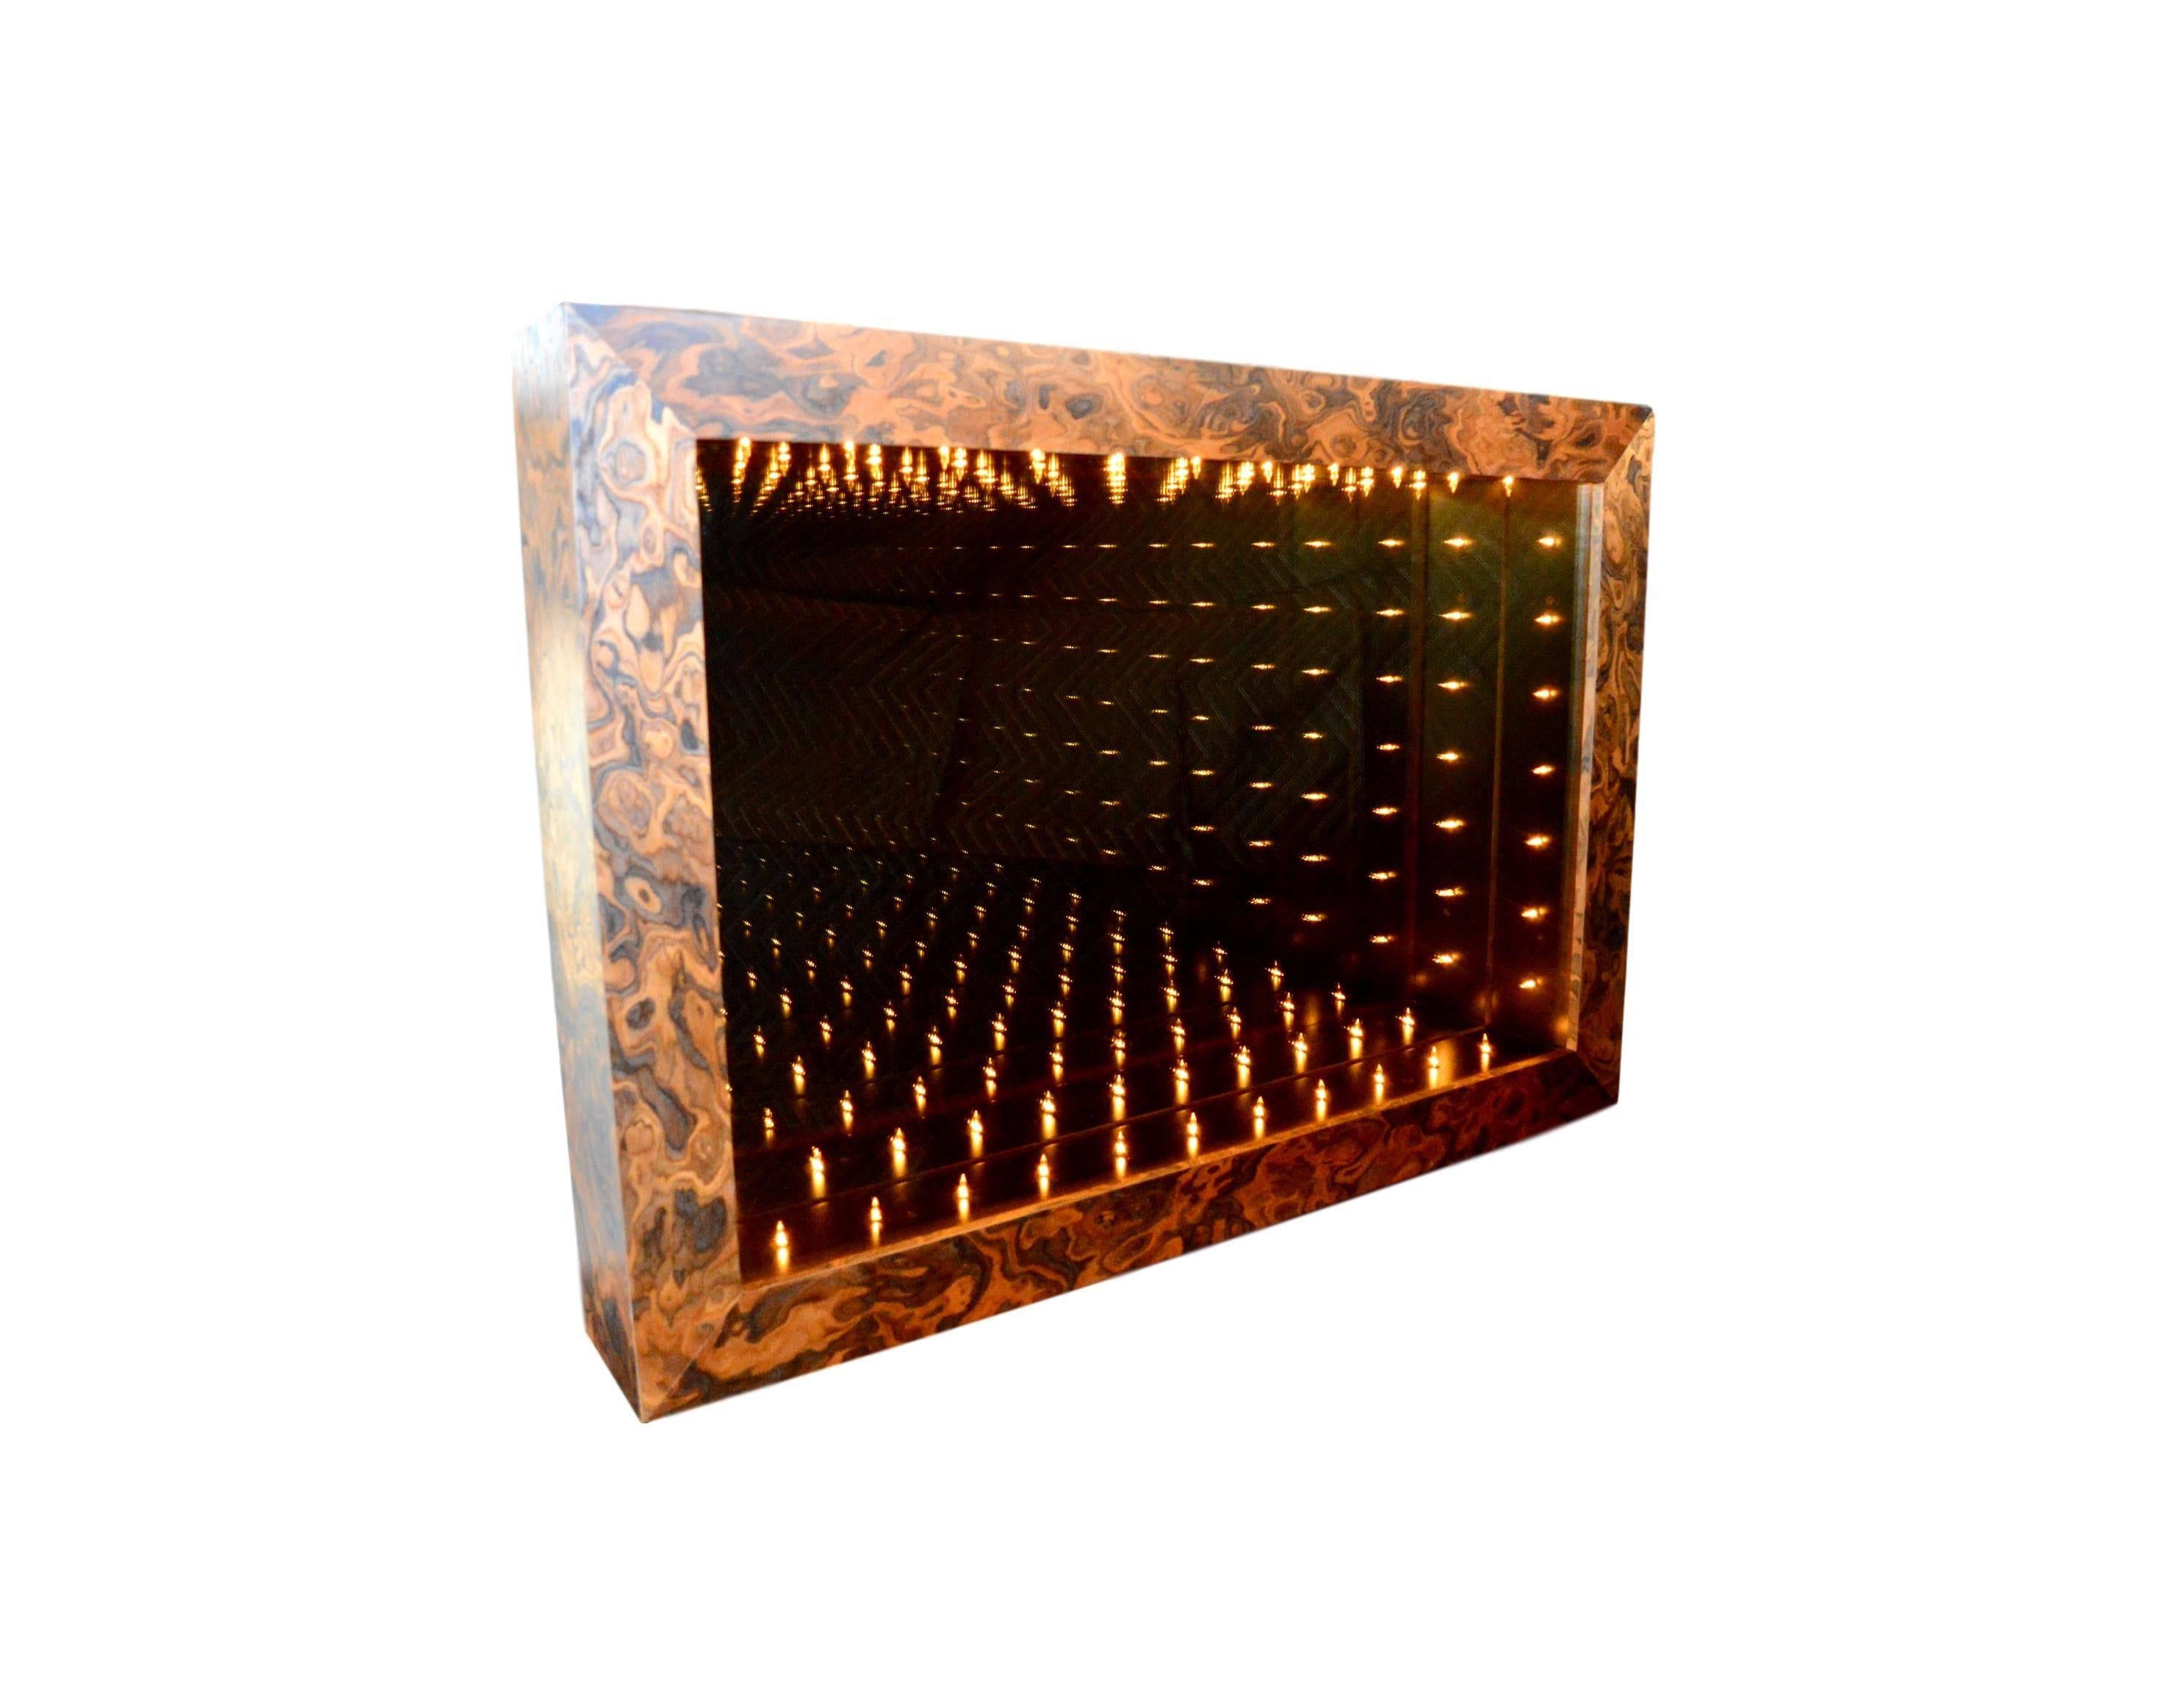 Massive burl wood rectangular infinity mirror by Merit. Mirror looks great off as well as an ambient light and piece of art while illuminated. 

Custom sizes and finishes available.